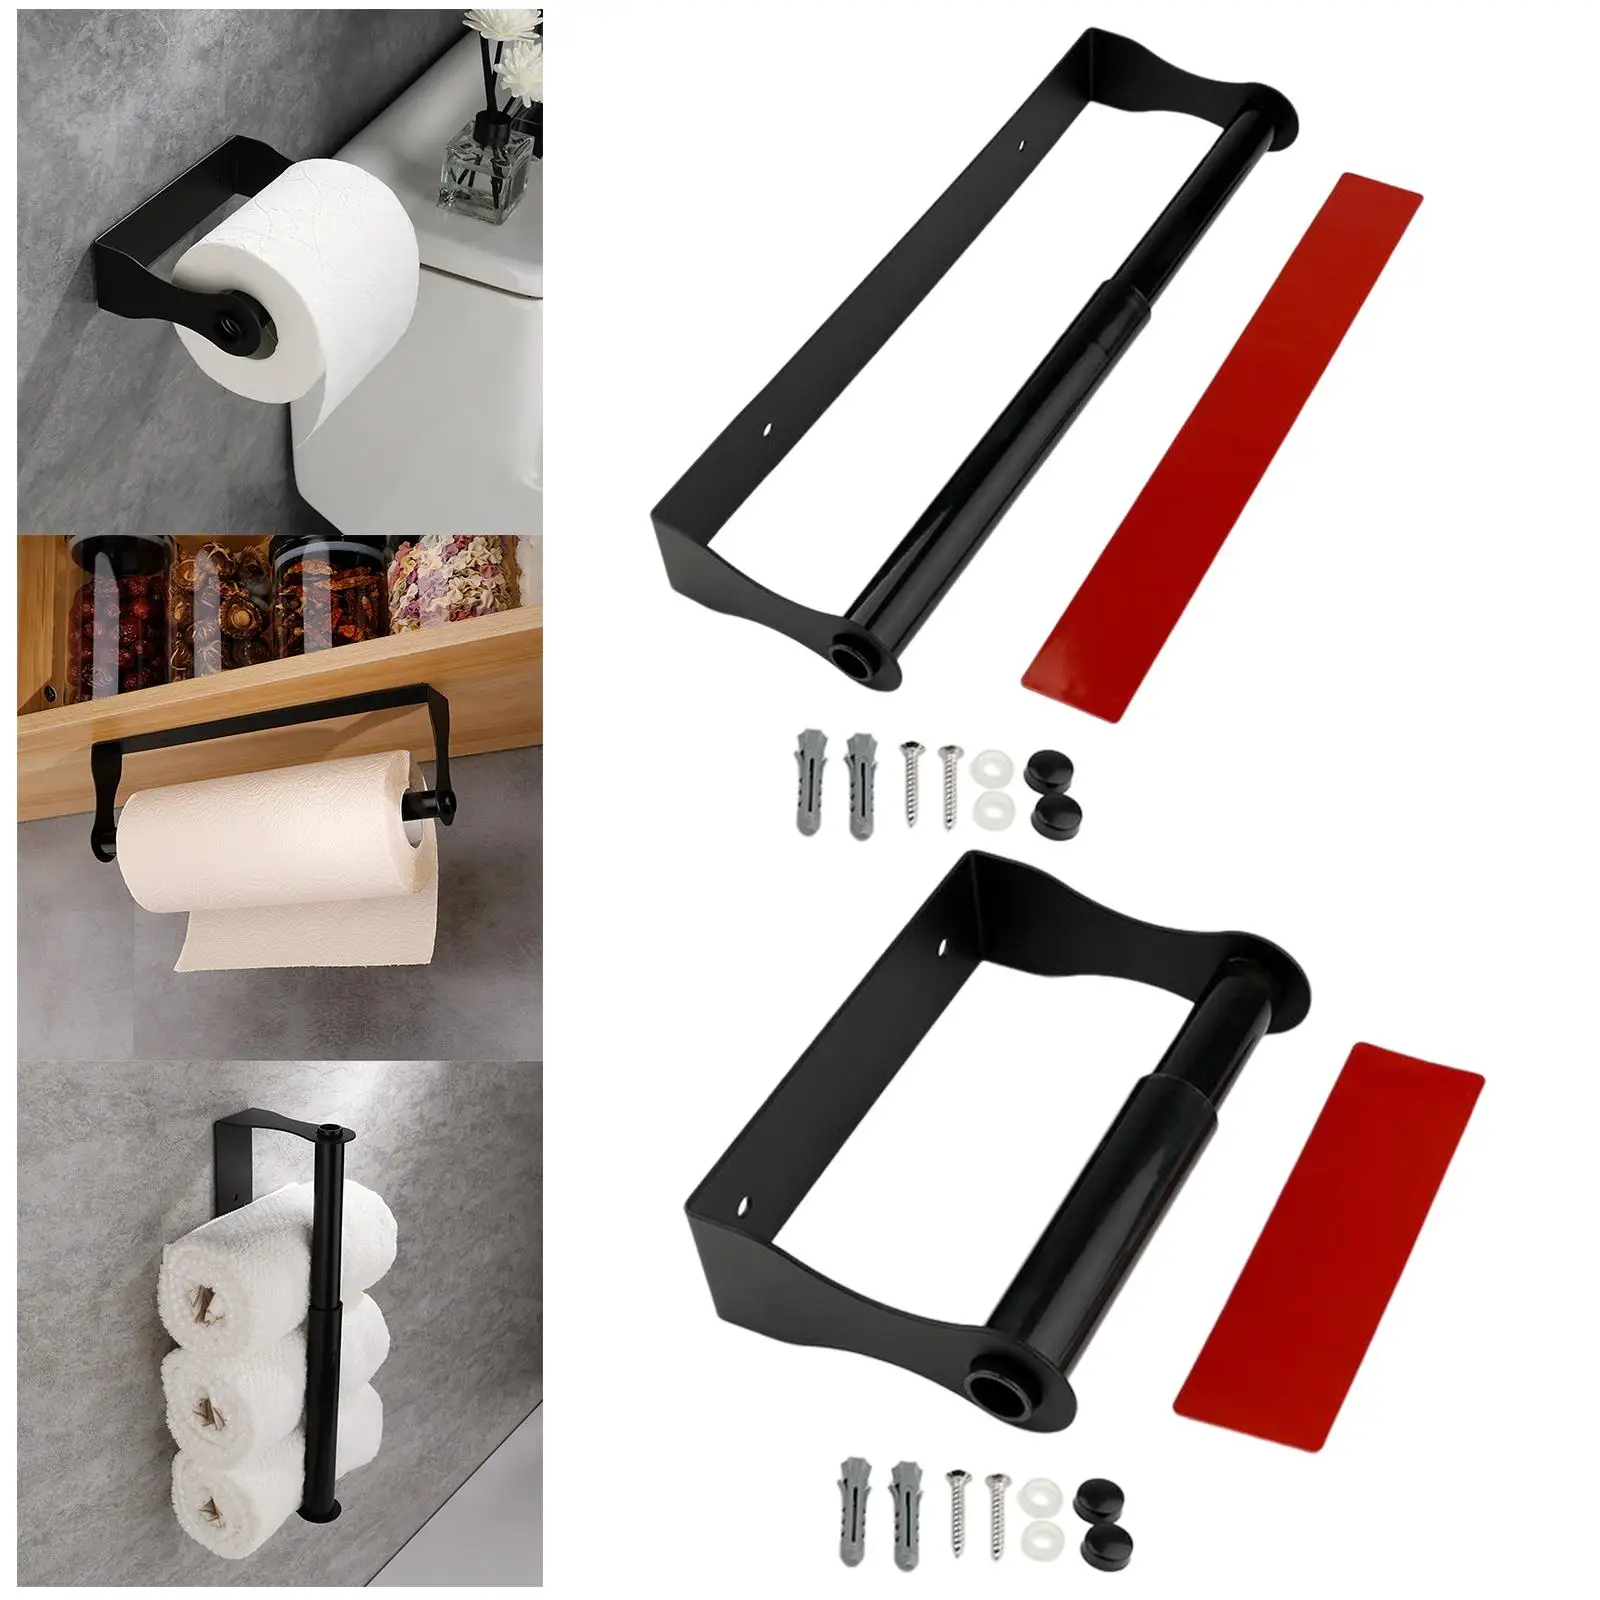 Stainless Steel Tissue Roll Holder Hangers Wall Mounted for RV Bathroom Home